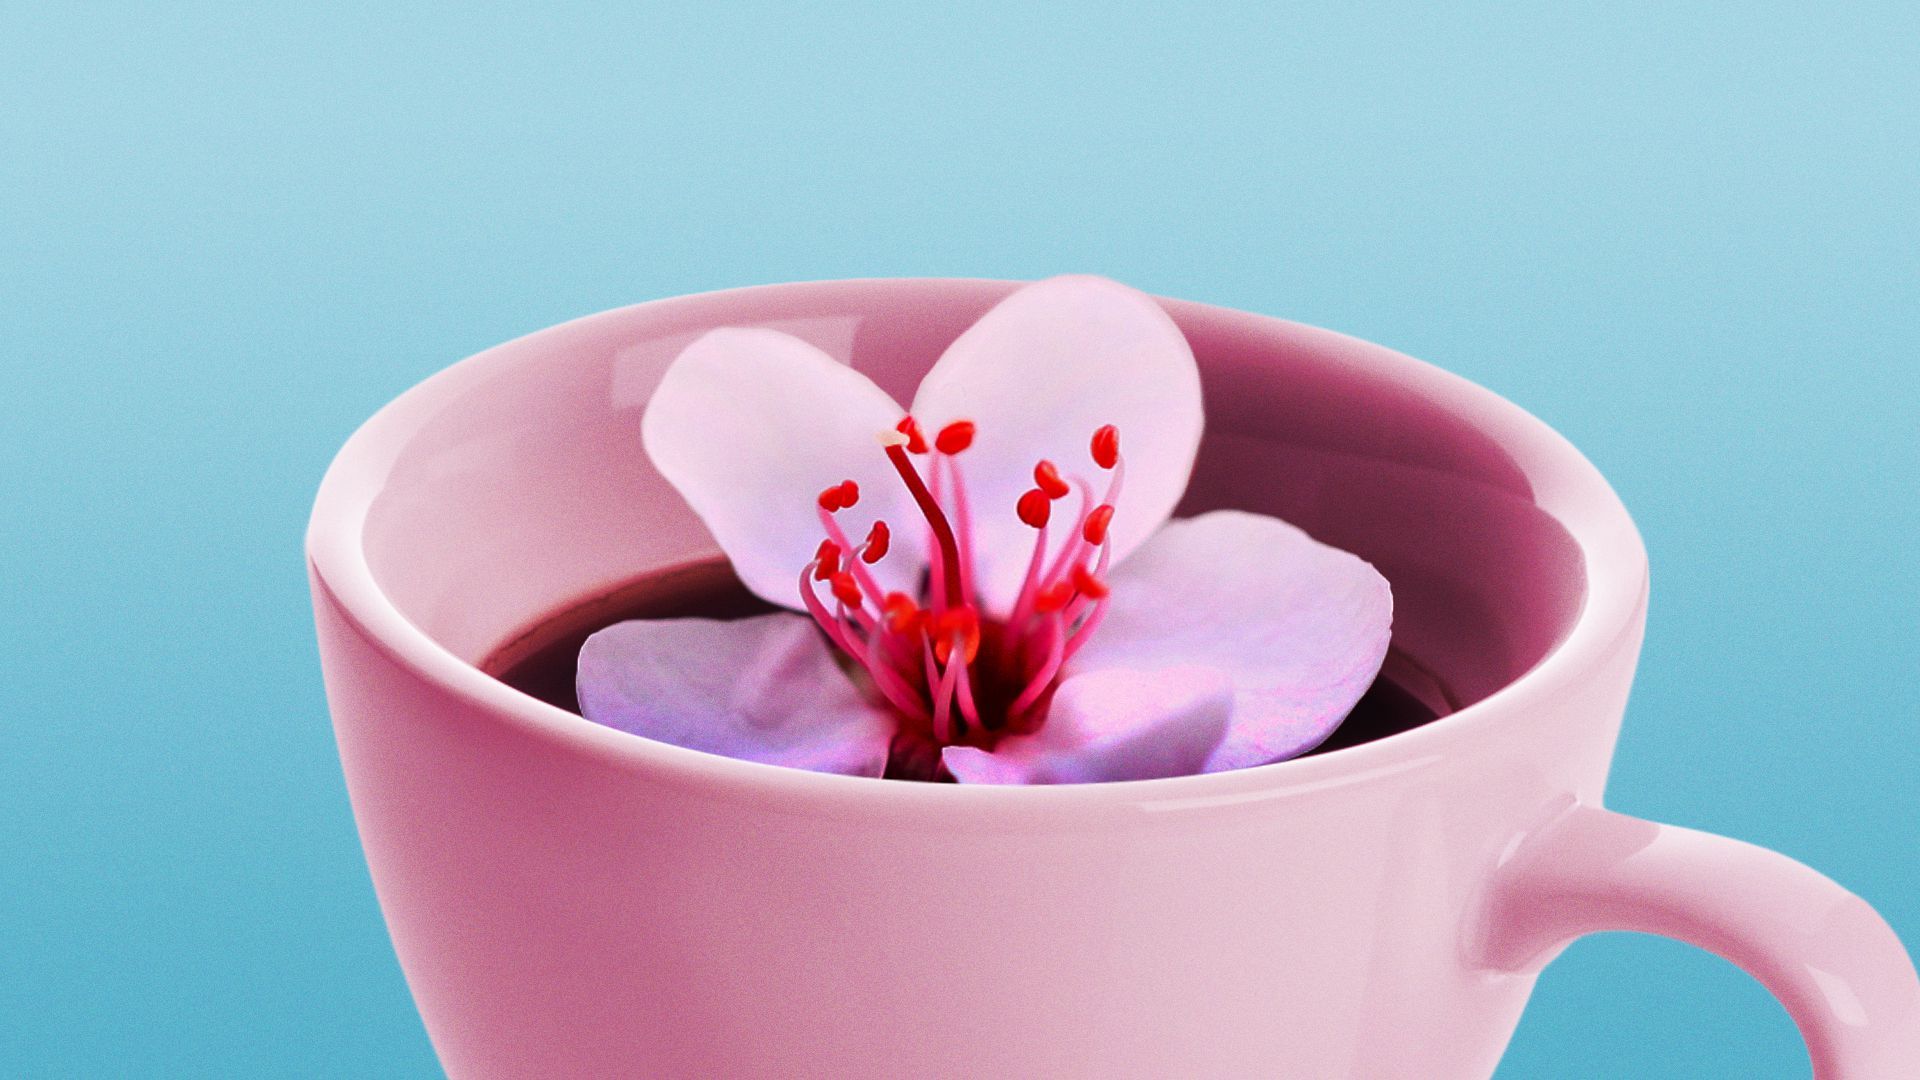 Illustration of a cherry blossom peeking out of a pink mug filled with coffee.